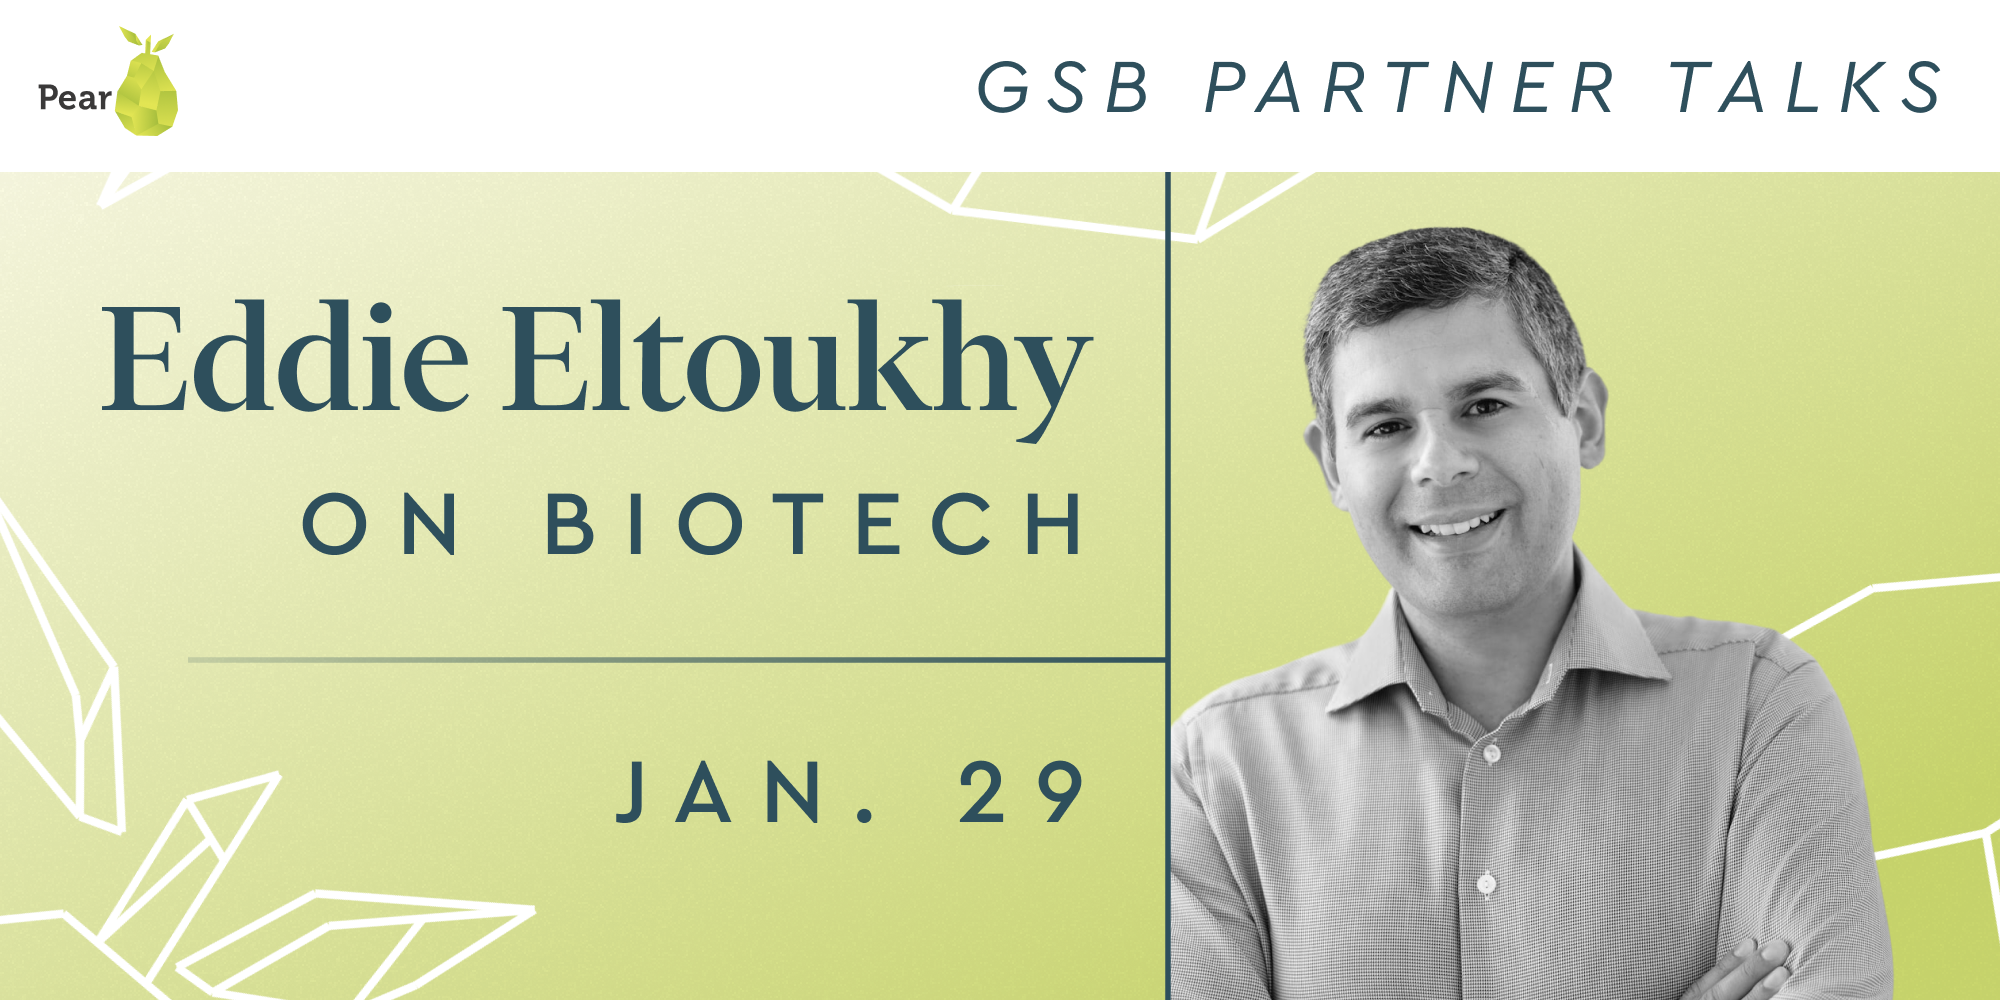 resources GSB Partner Talks: Insights and Expertise in Biotech with Pear VC’s Eddie Eltouhky